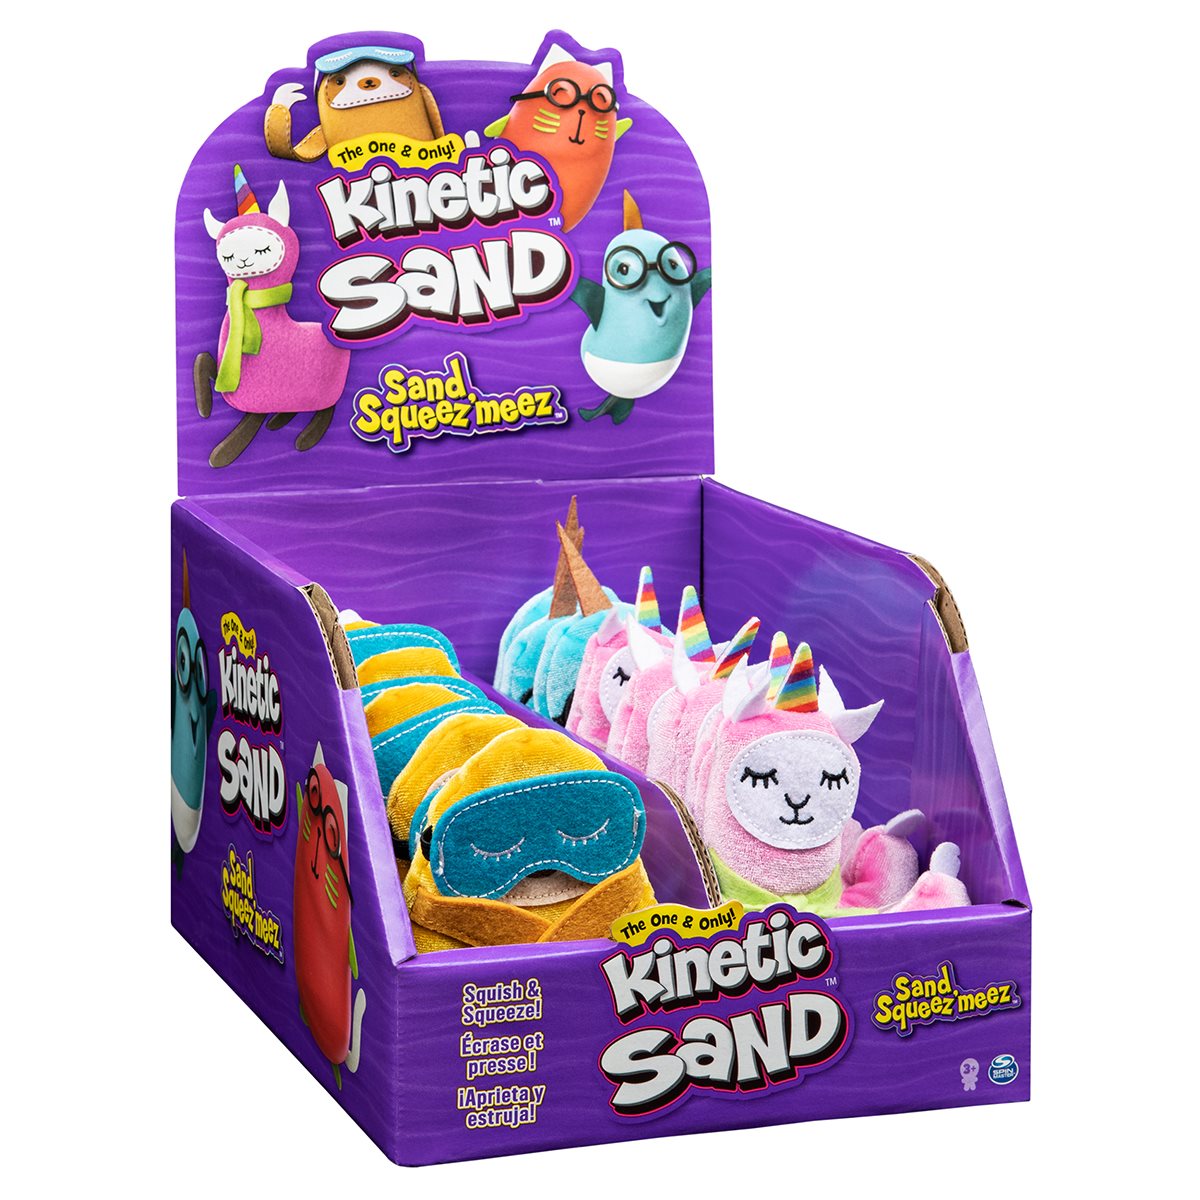 Great for Stockings! Kinetic Sand Squeezmeez Lama Sensory and stress item NEW! 